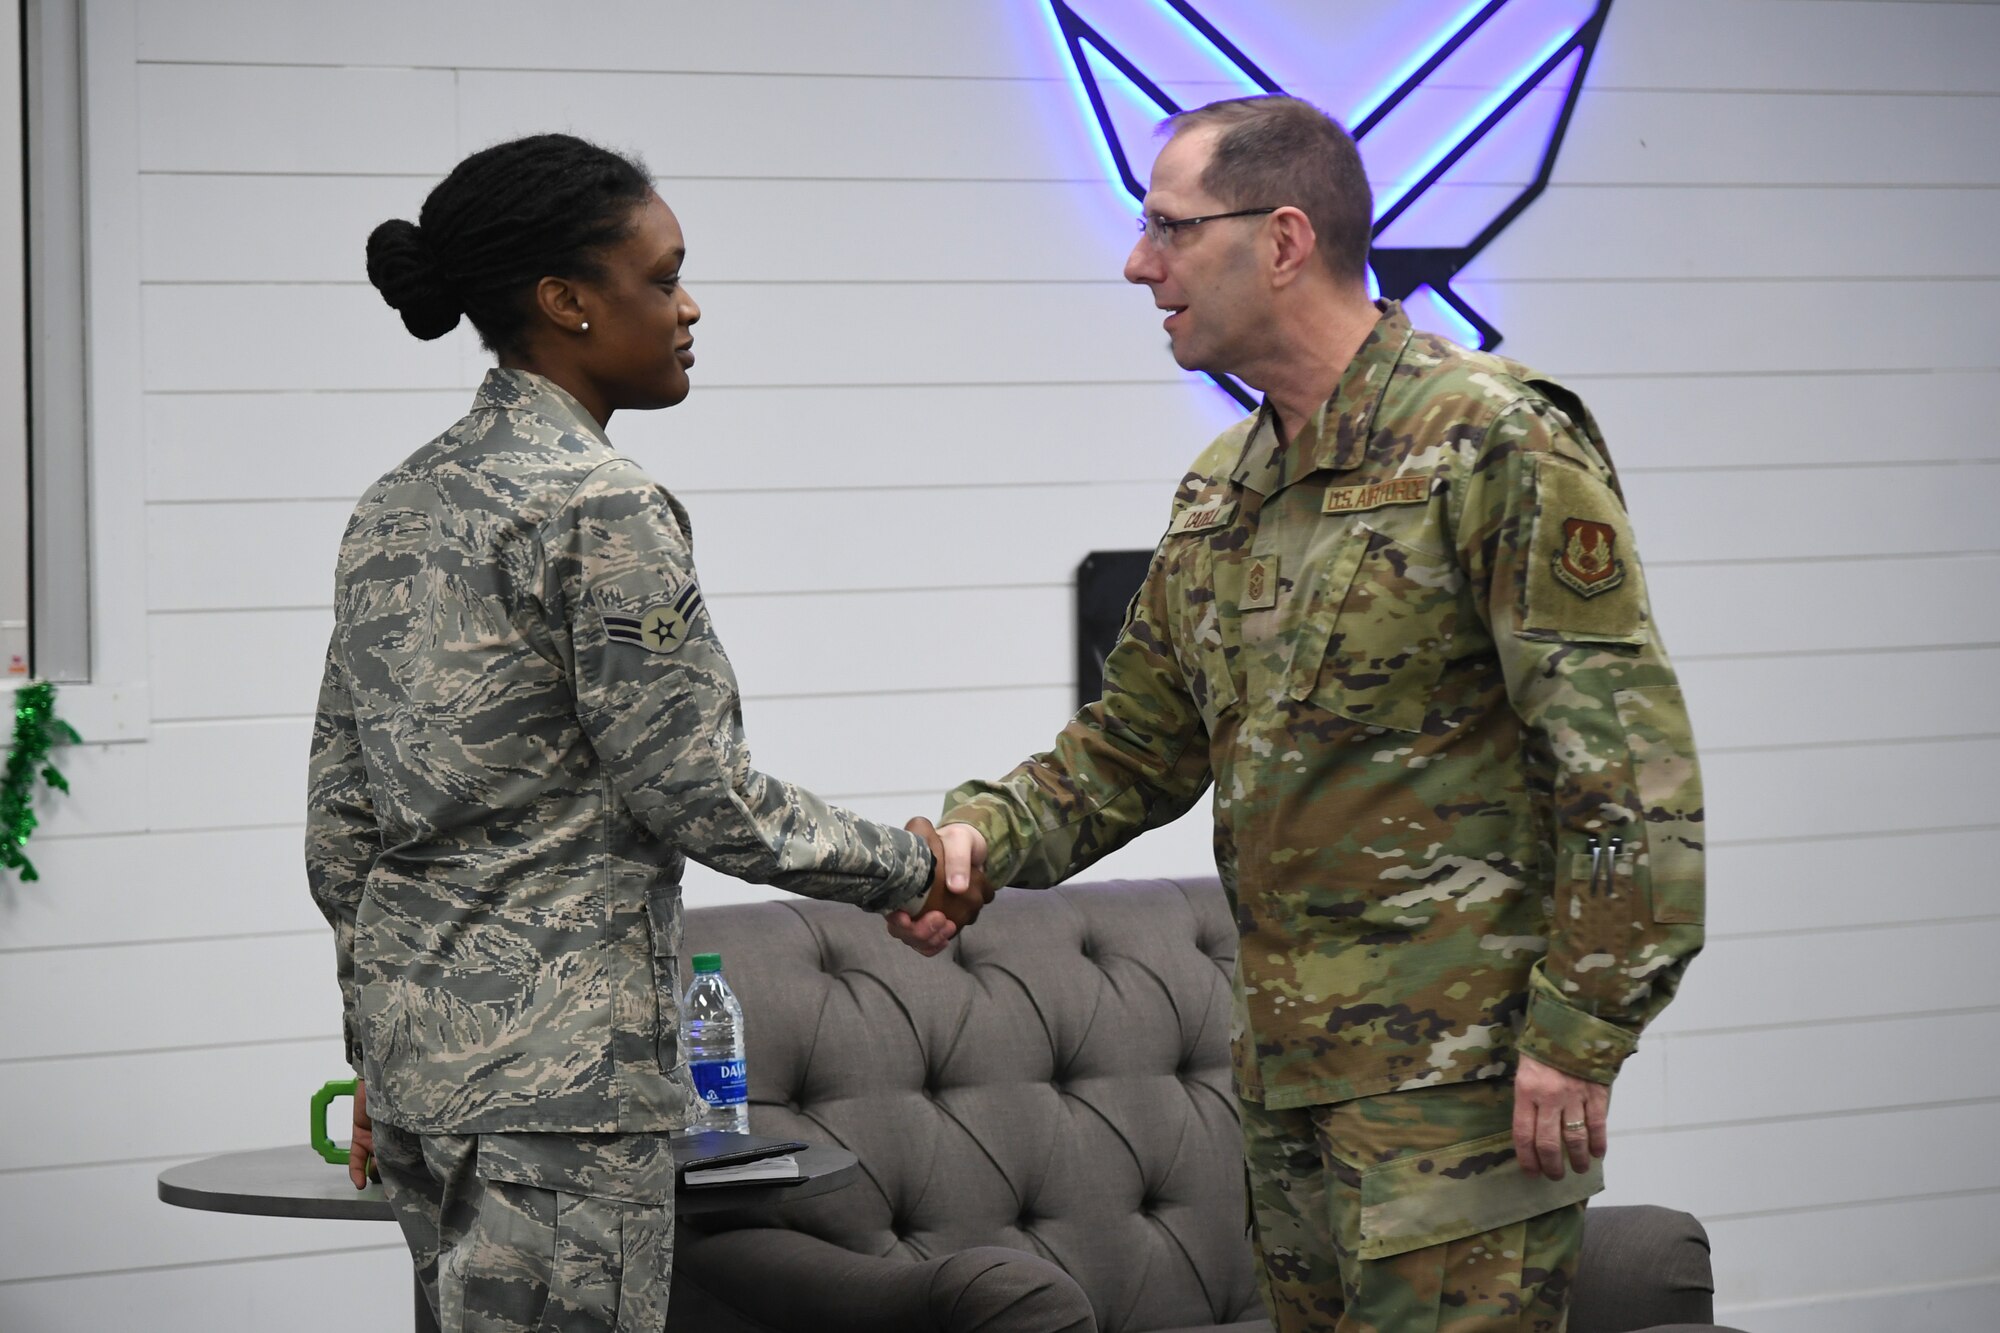 Chief Master Sgt. Stanley C. Cadell, Air Force Materiel Command command chief, presents a coin to Airman 1st Class Lelauni Sanders, Air Force Sustainment Center Contracting Directorate, during an early morning “coffee talk” at Hill Air Force Base, Utah, March 3, 2020. Cadell visited Hill AFB March 1-3 to tour facilities and meet with the base’s Airmen. (U.S. Air Force photo by Cynthia Griggs)